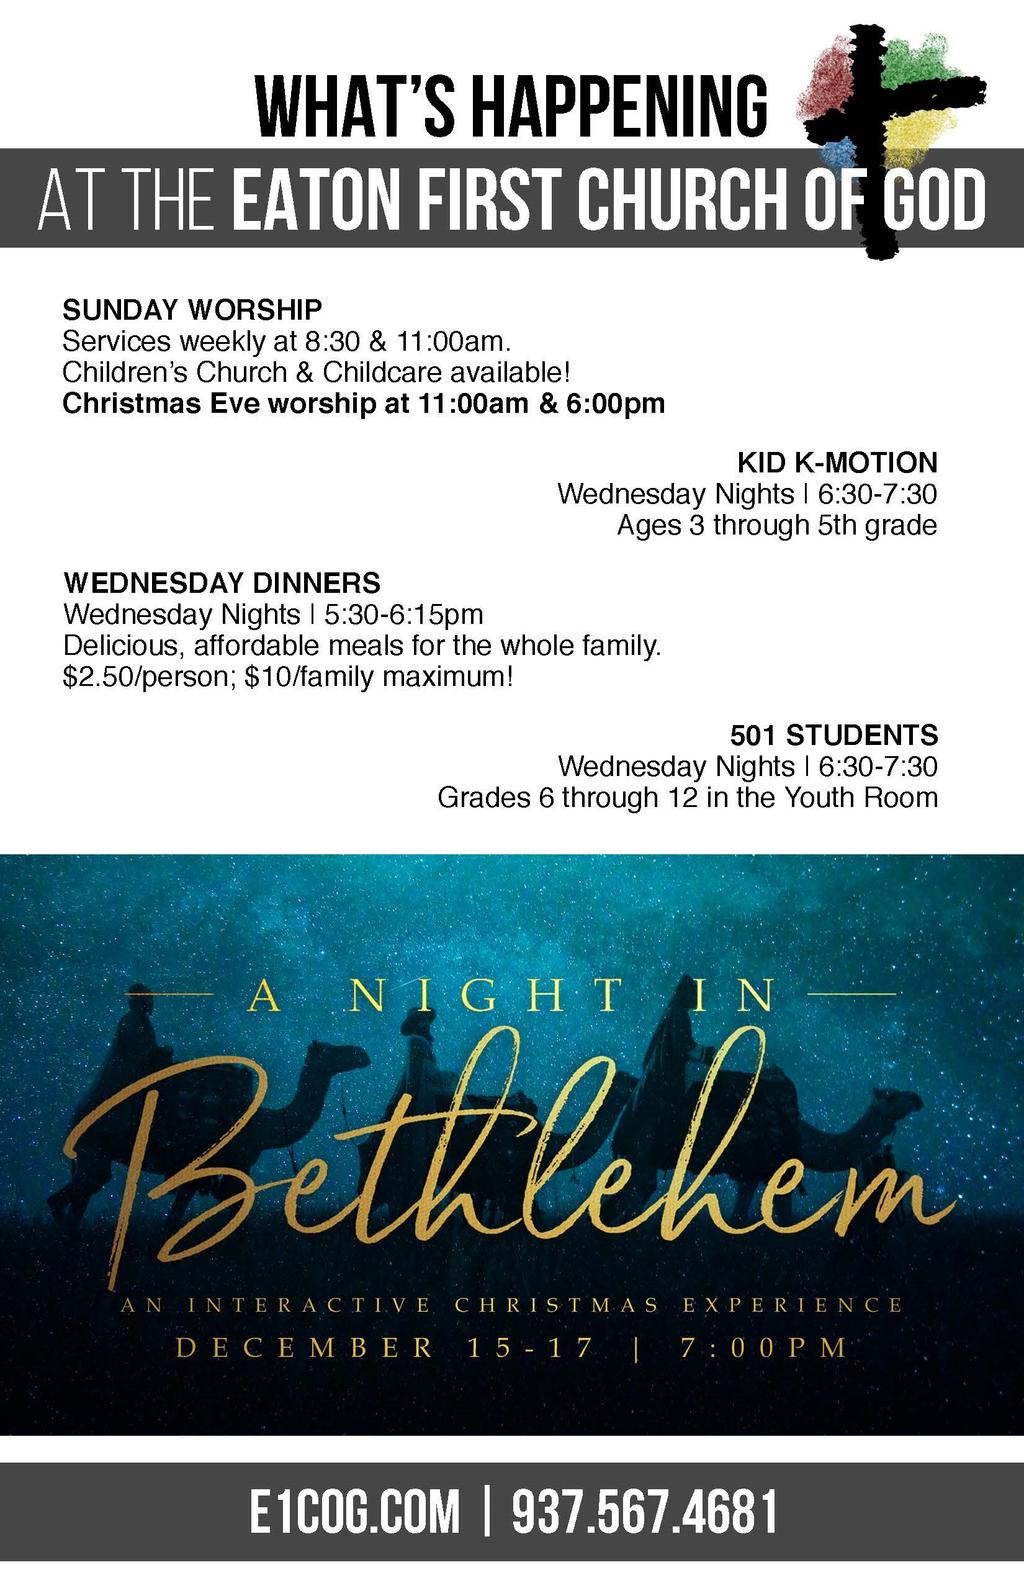 COMMUNITY NEWS E A T O N F I R S T C H U R C H OF GOD D E C E M B E R 2 0 1 7 A NIGHT IN BETHLEHEM This year s Christmas Program will be an interactive Christmas event for the whole family.